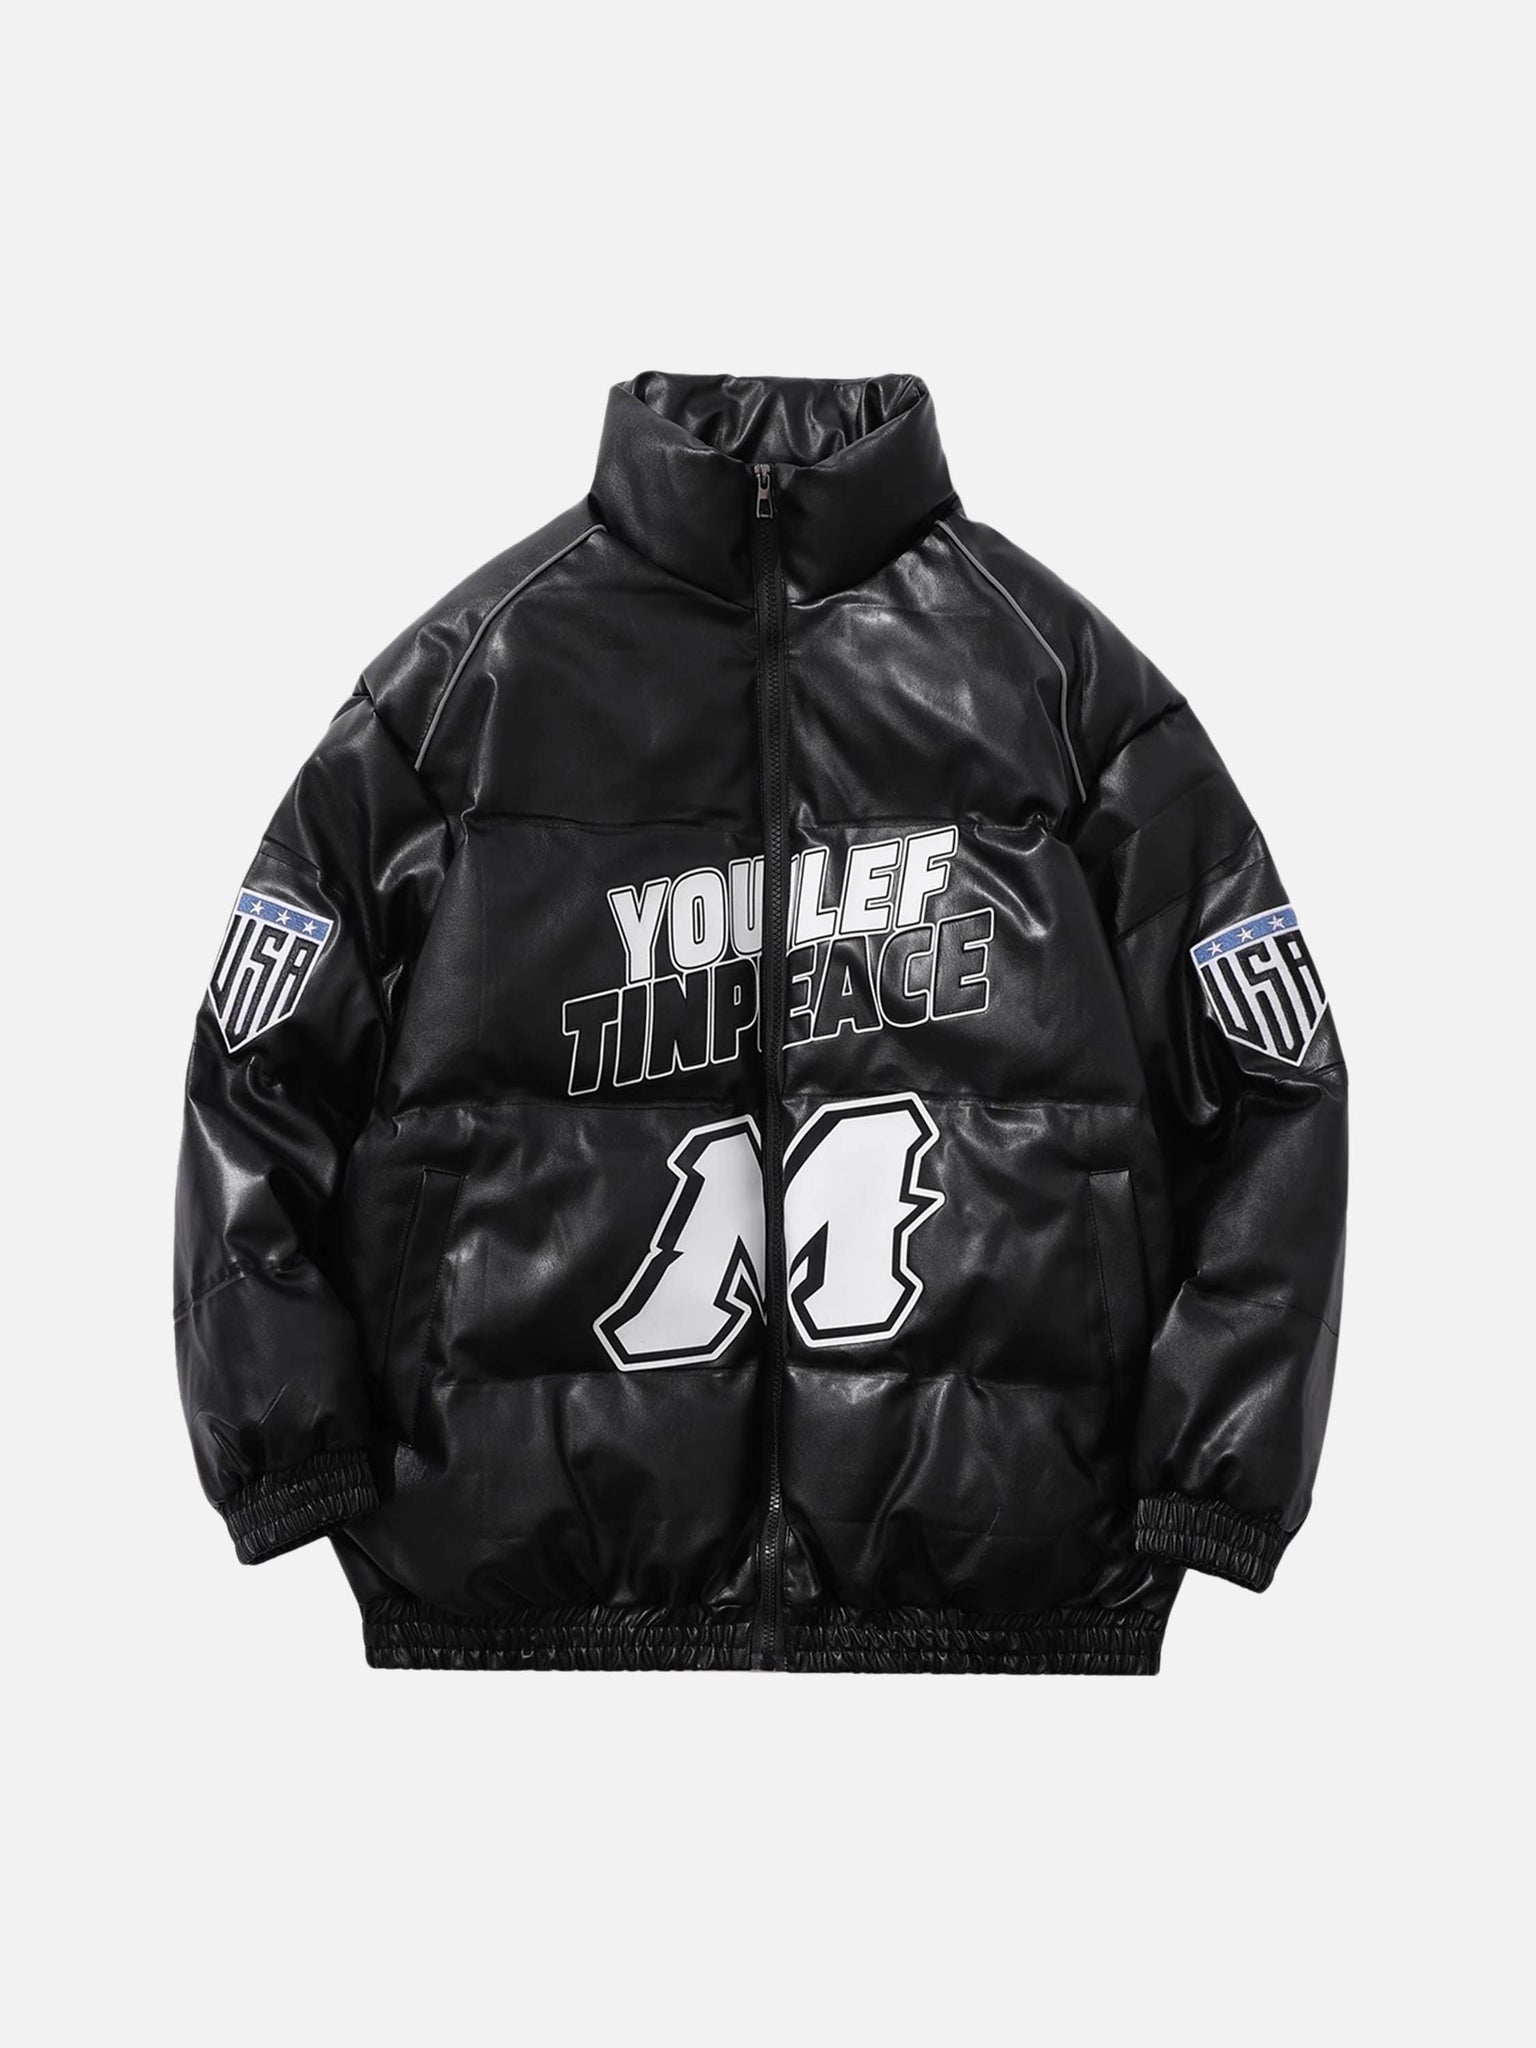 Thesupermade American Hip-hop Loose Trendy Cotton Jacket